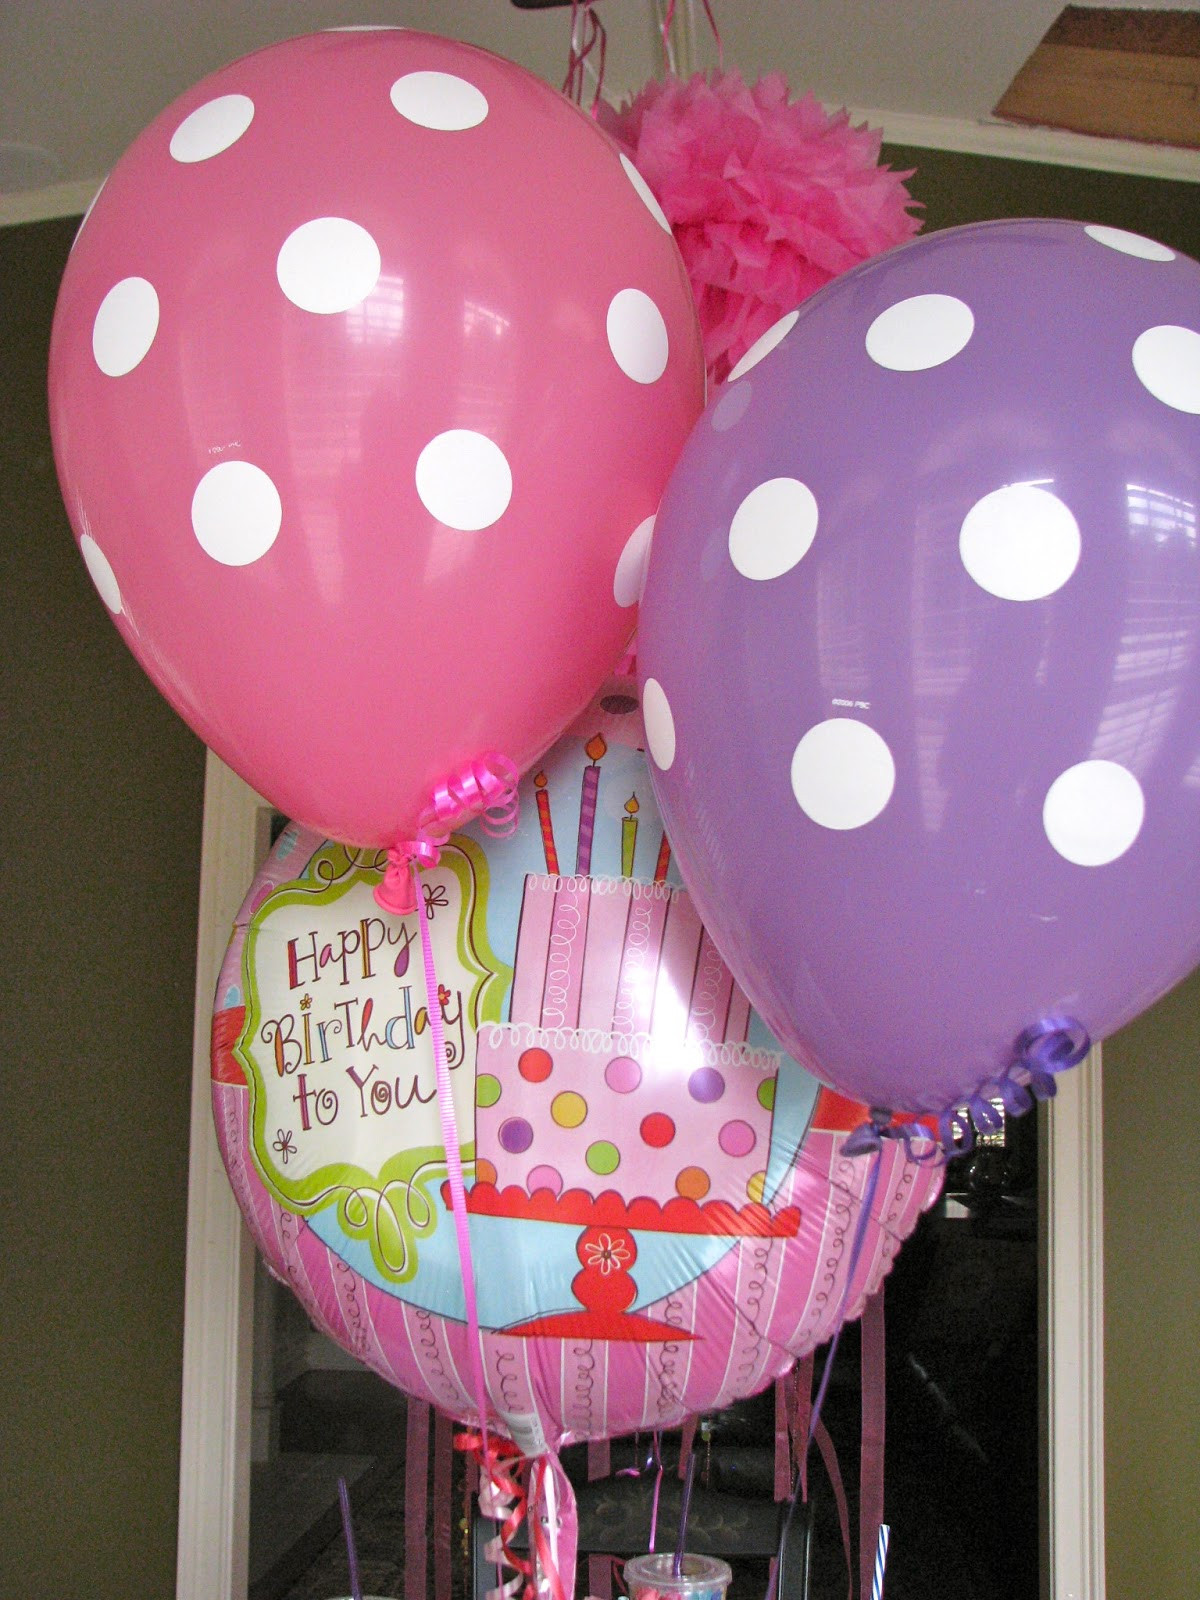 Homemade Birthday Decorations
 HomeMadeville Your Place for HomeMade Inspiration Girl s